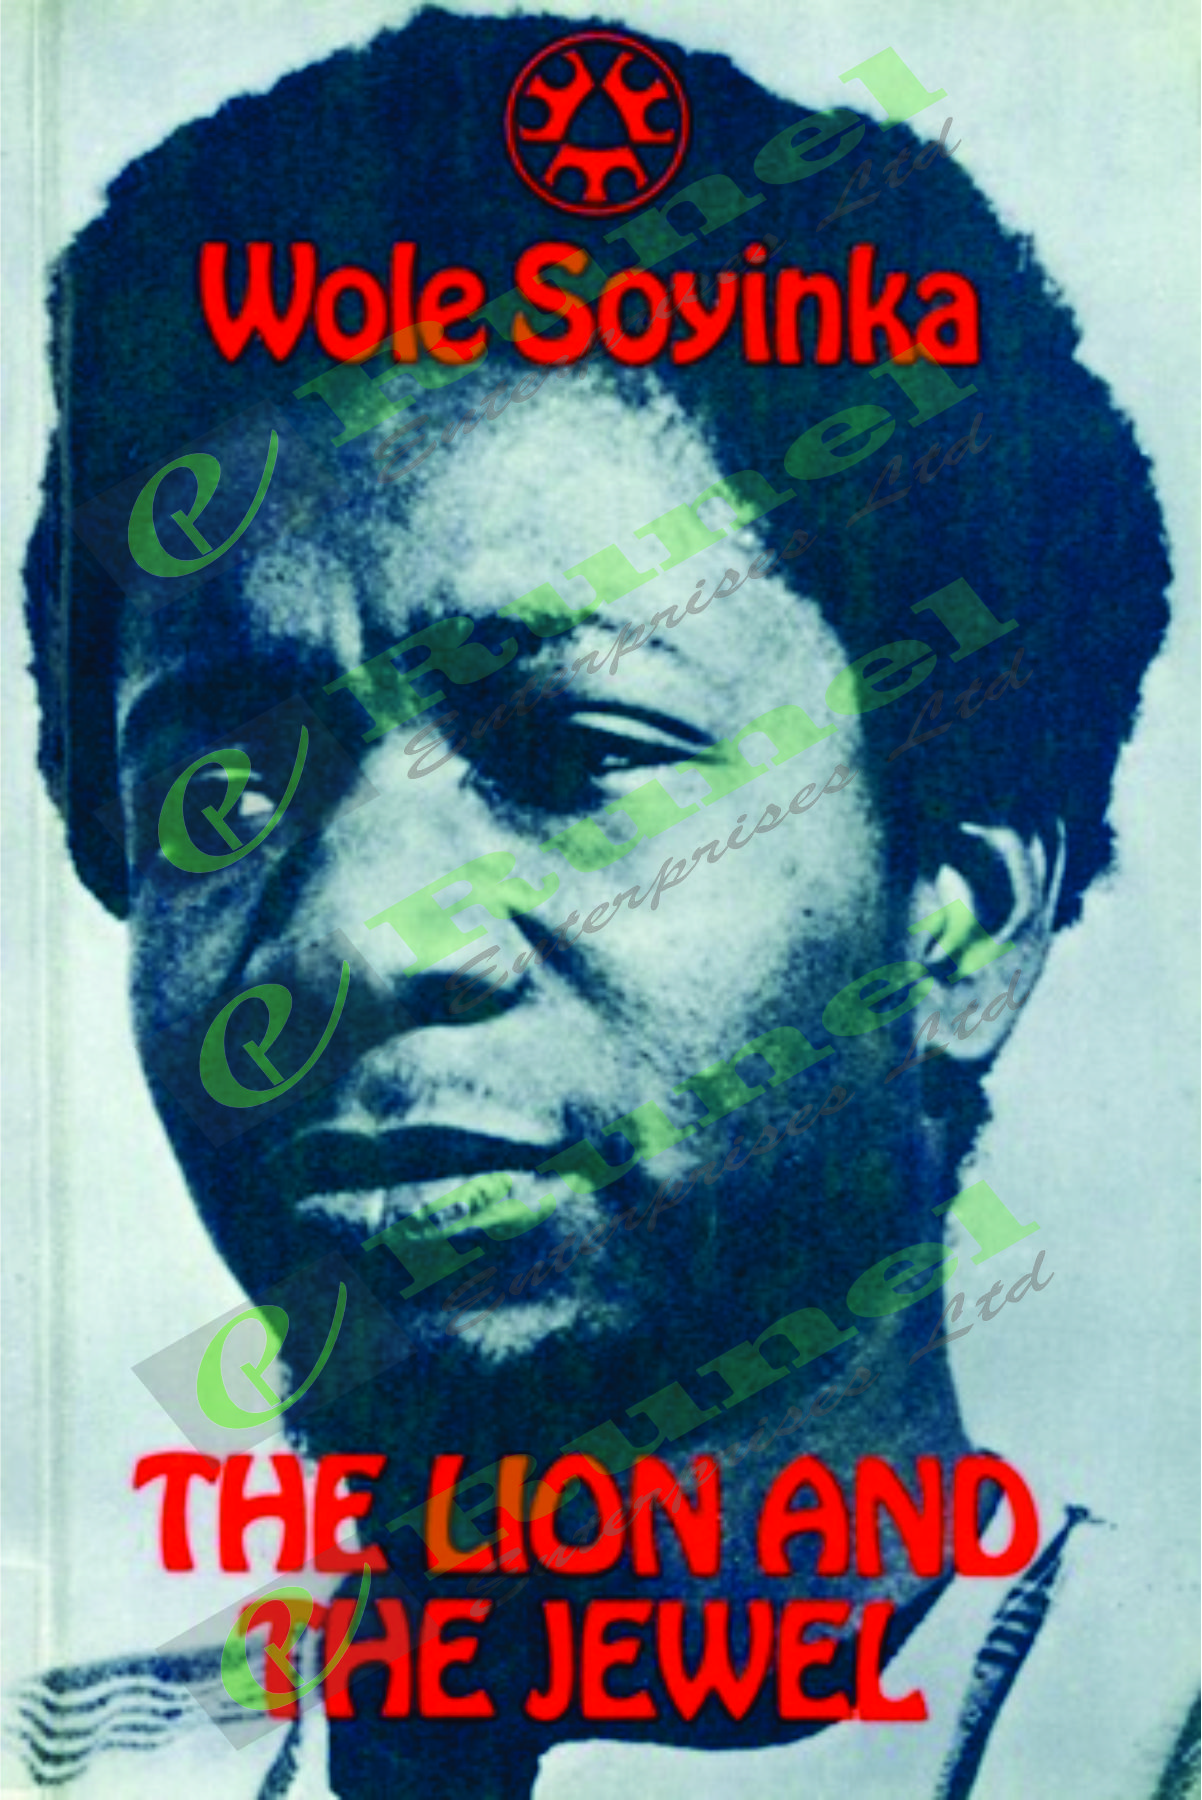 lion and the jewel by wole soyinka movie